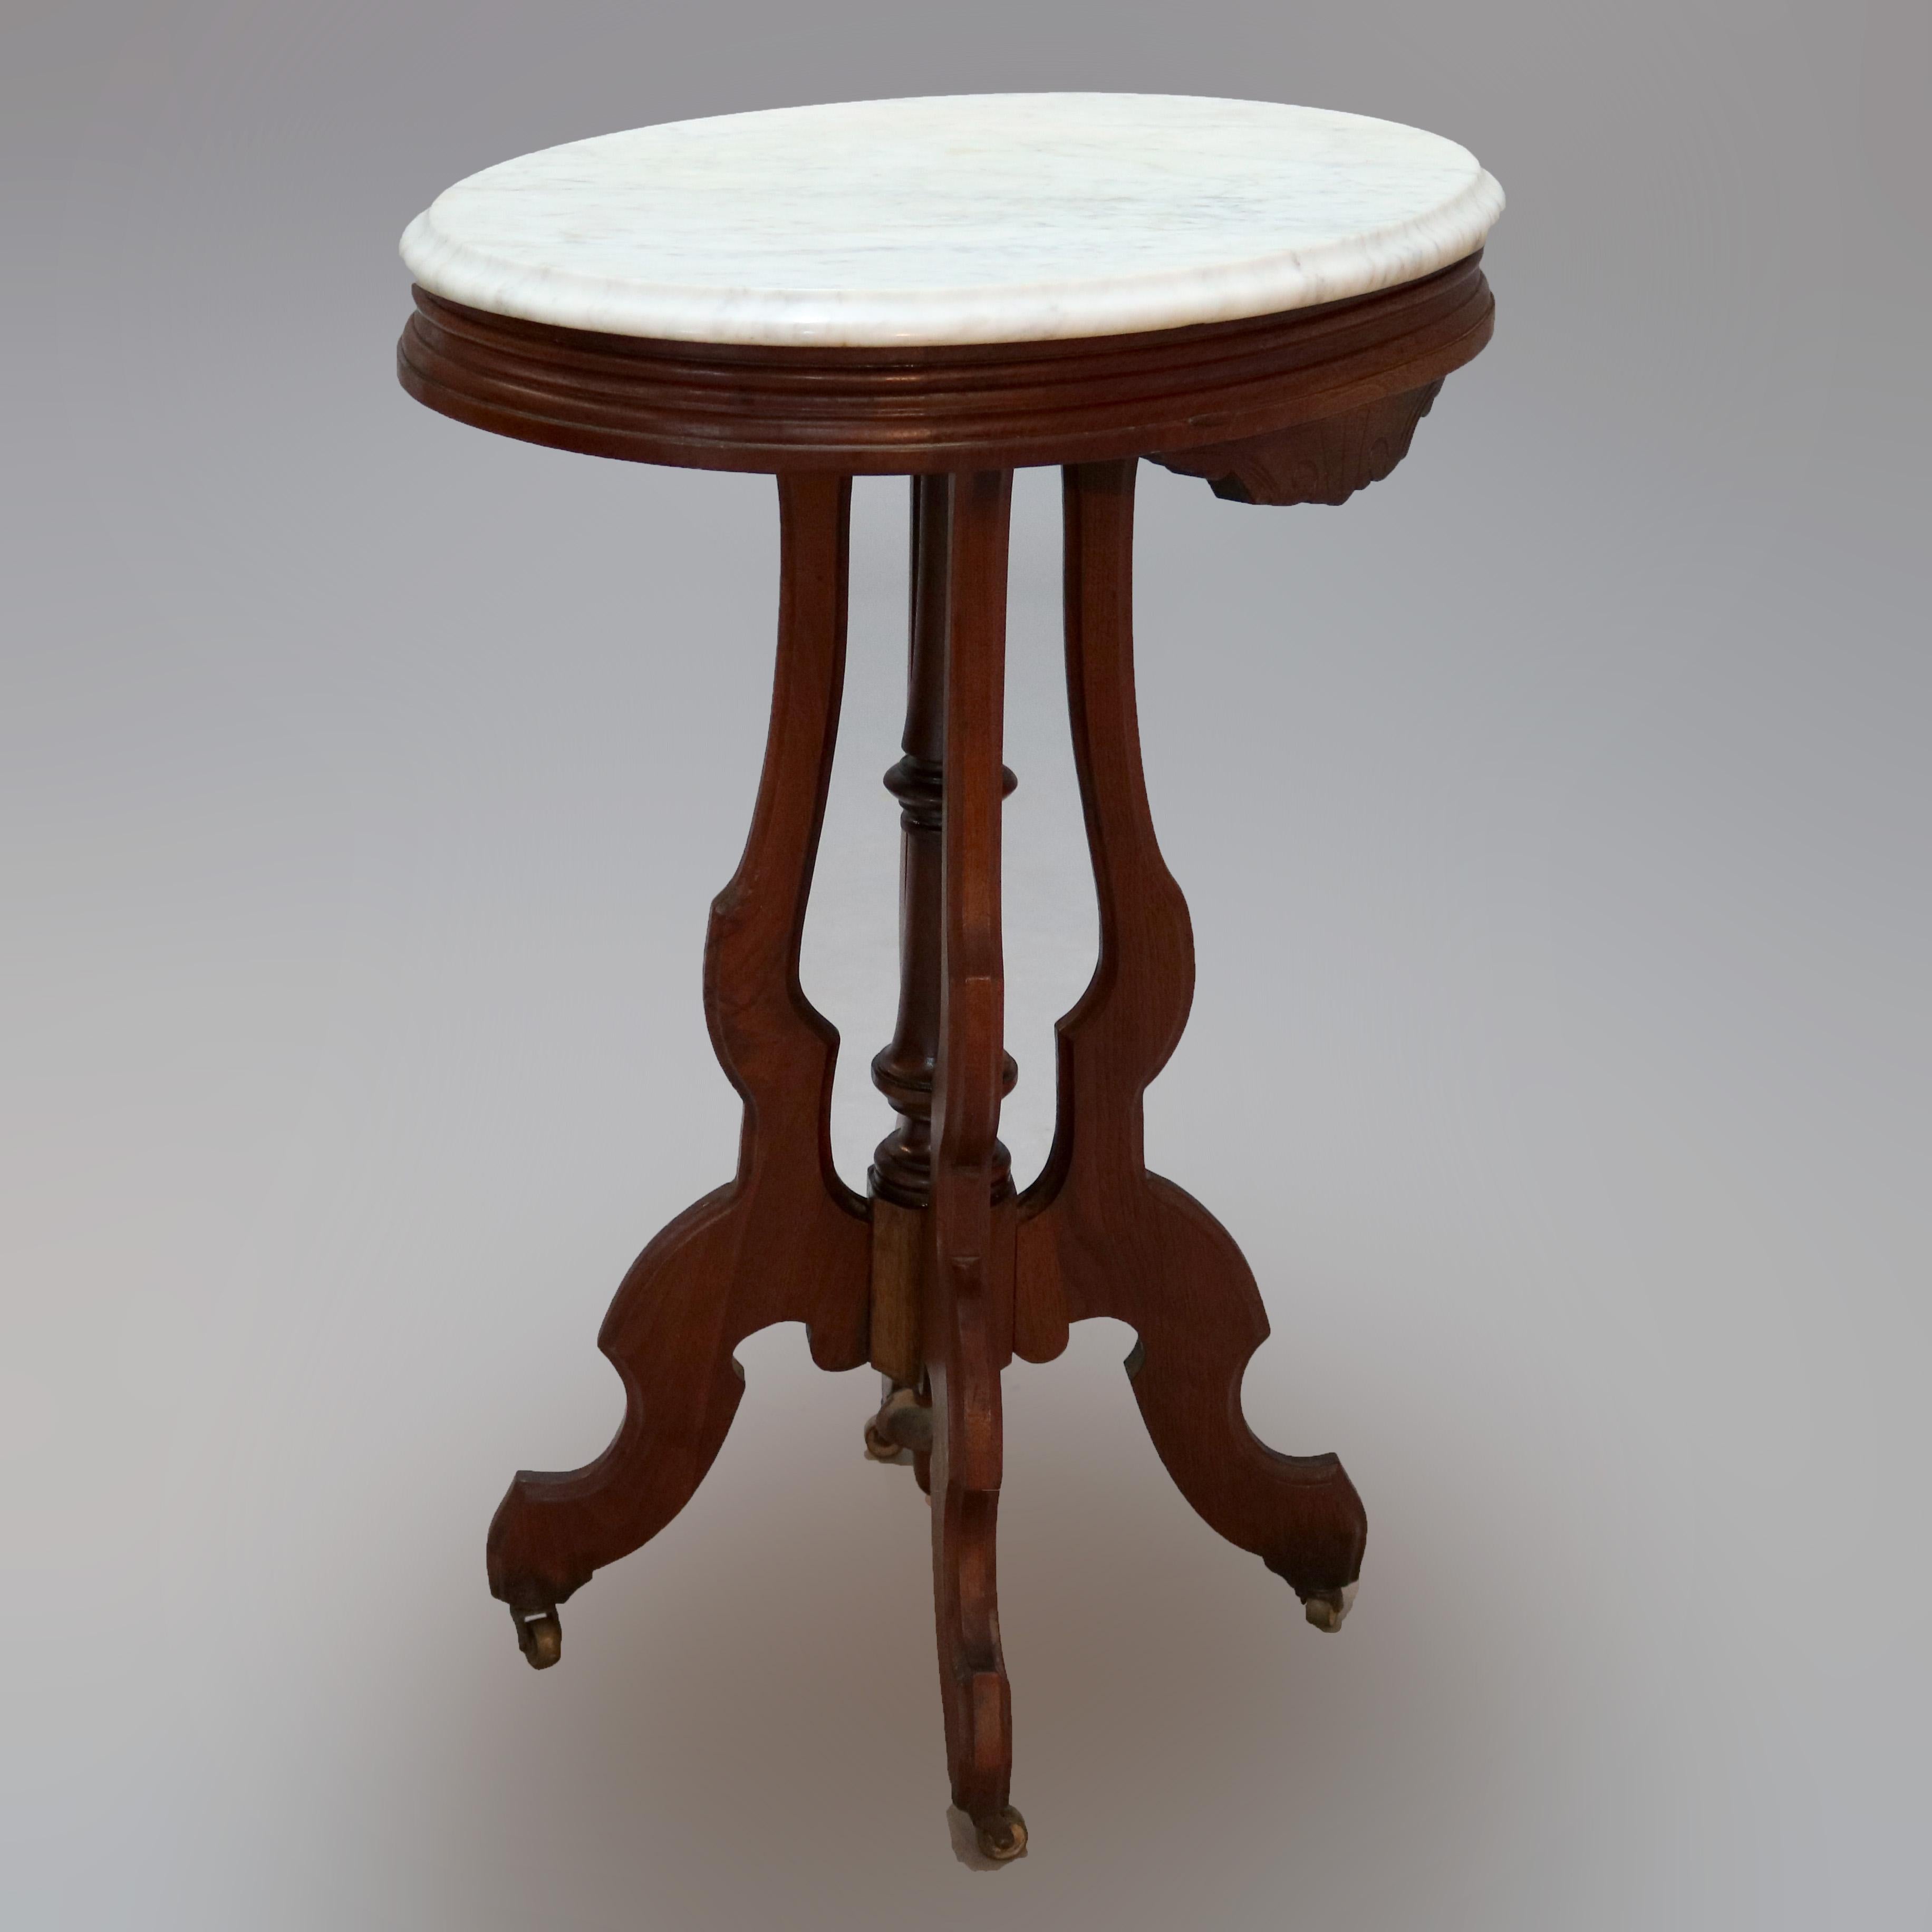 Wood Antique Renaissance Revival Walnut Oval Marble Top Table, Circa 1890